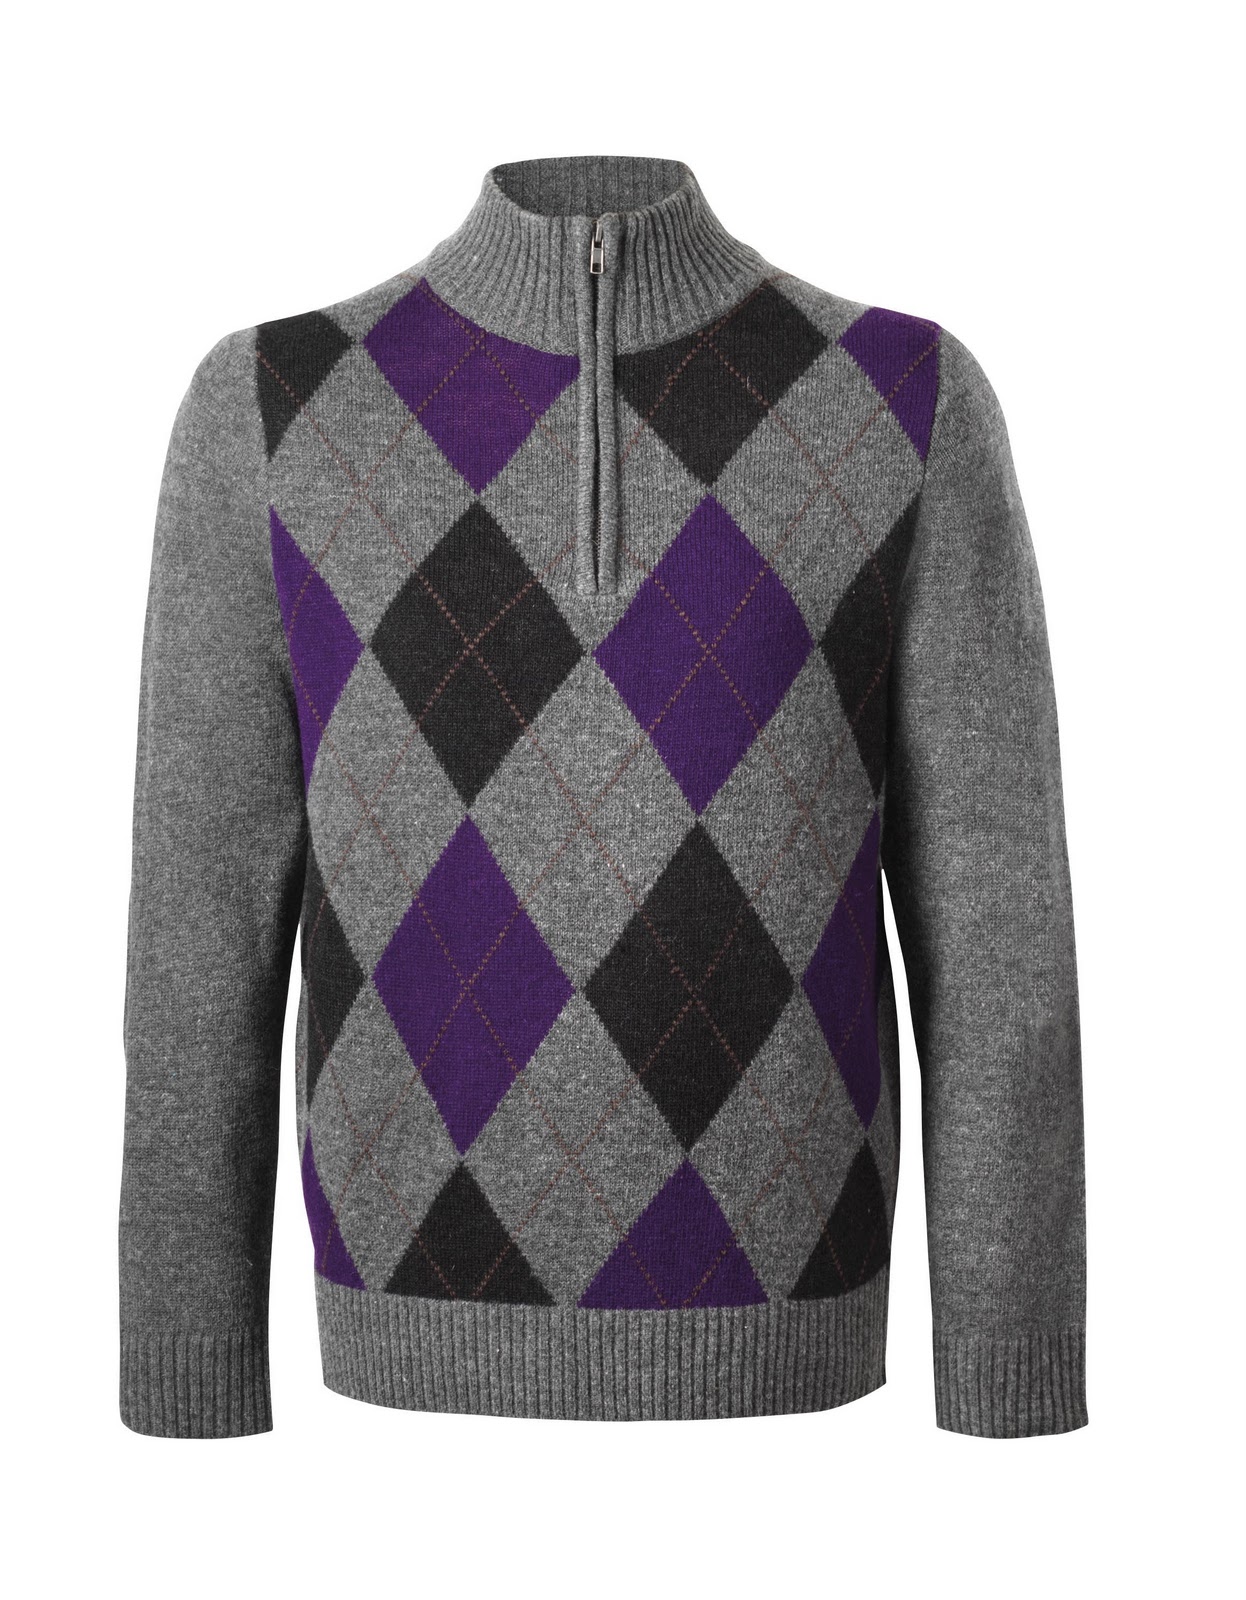 men's styling: The Argyle Sweater